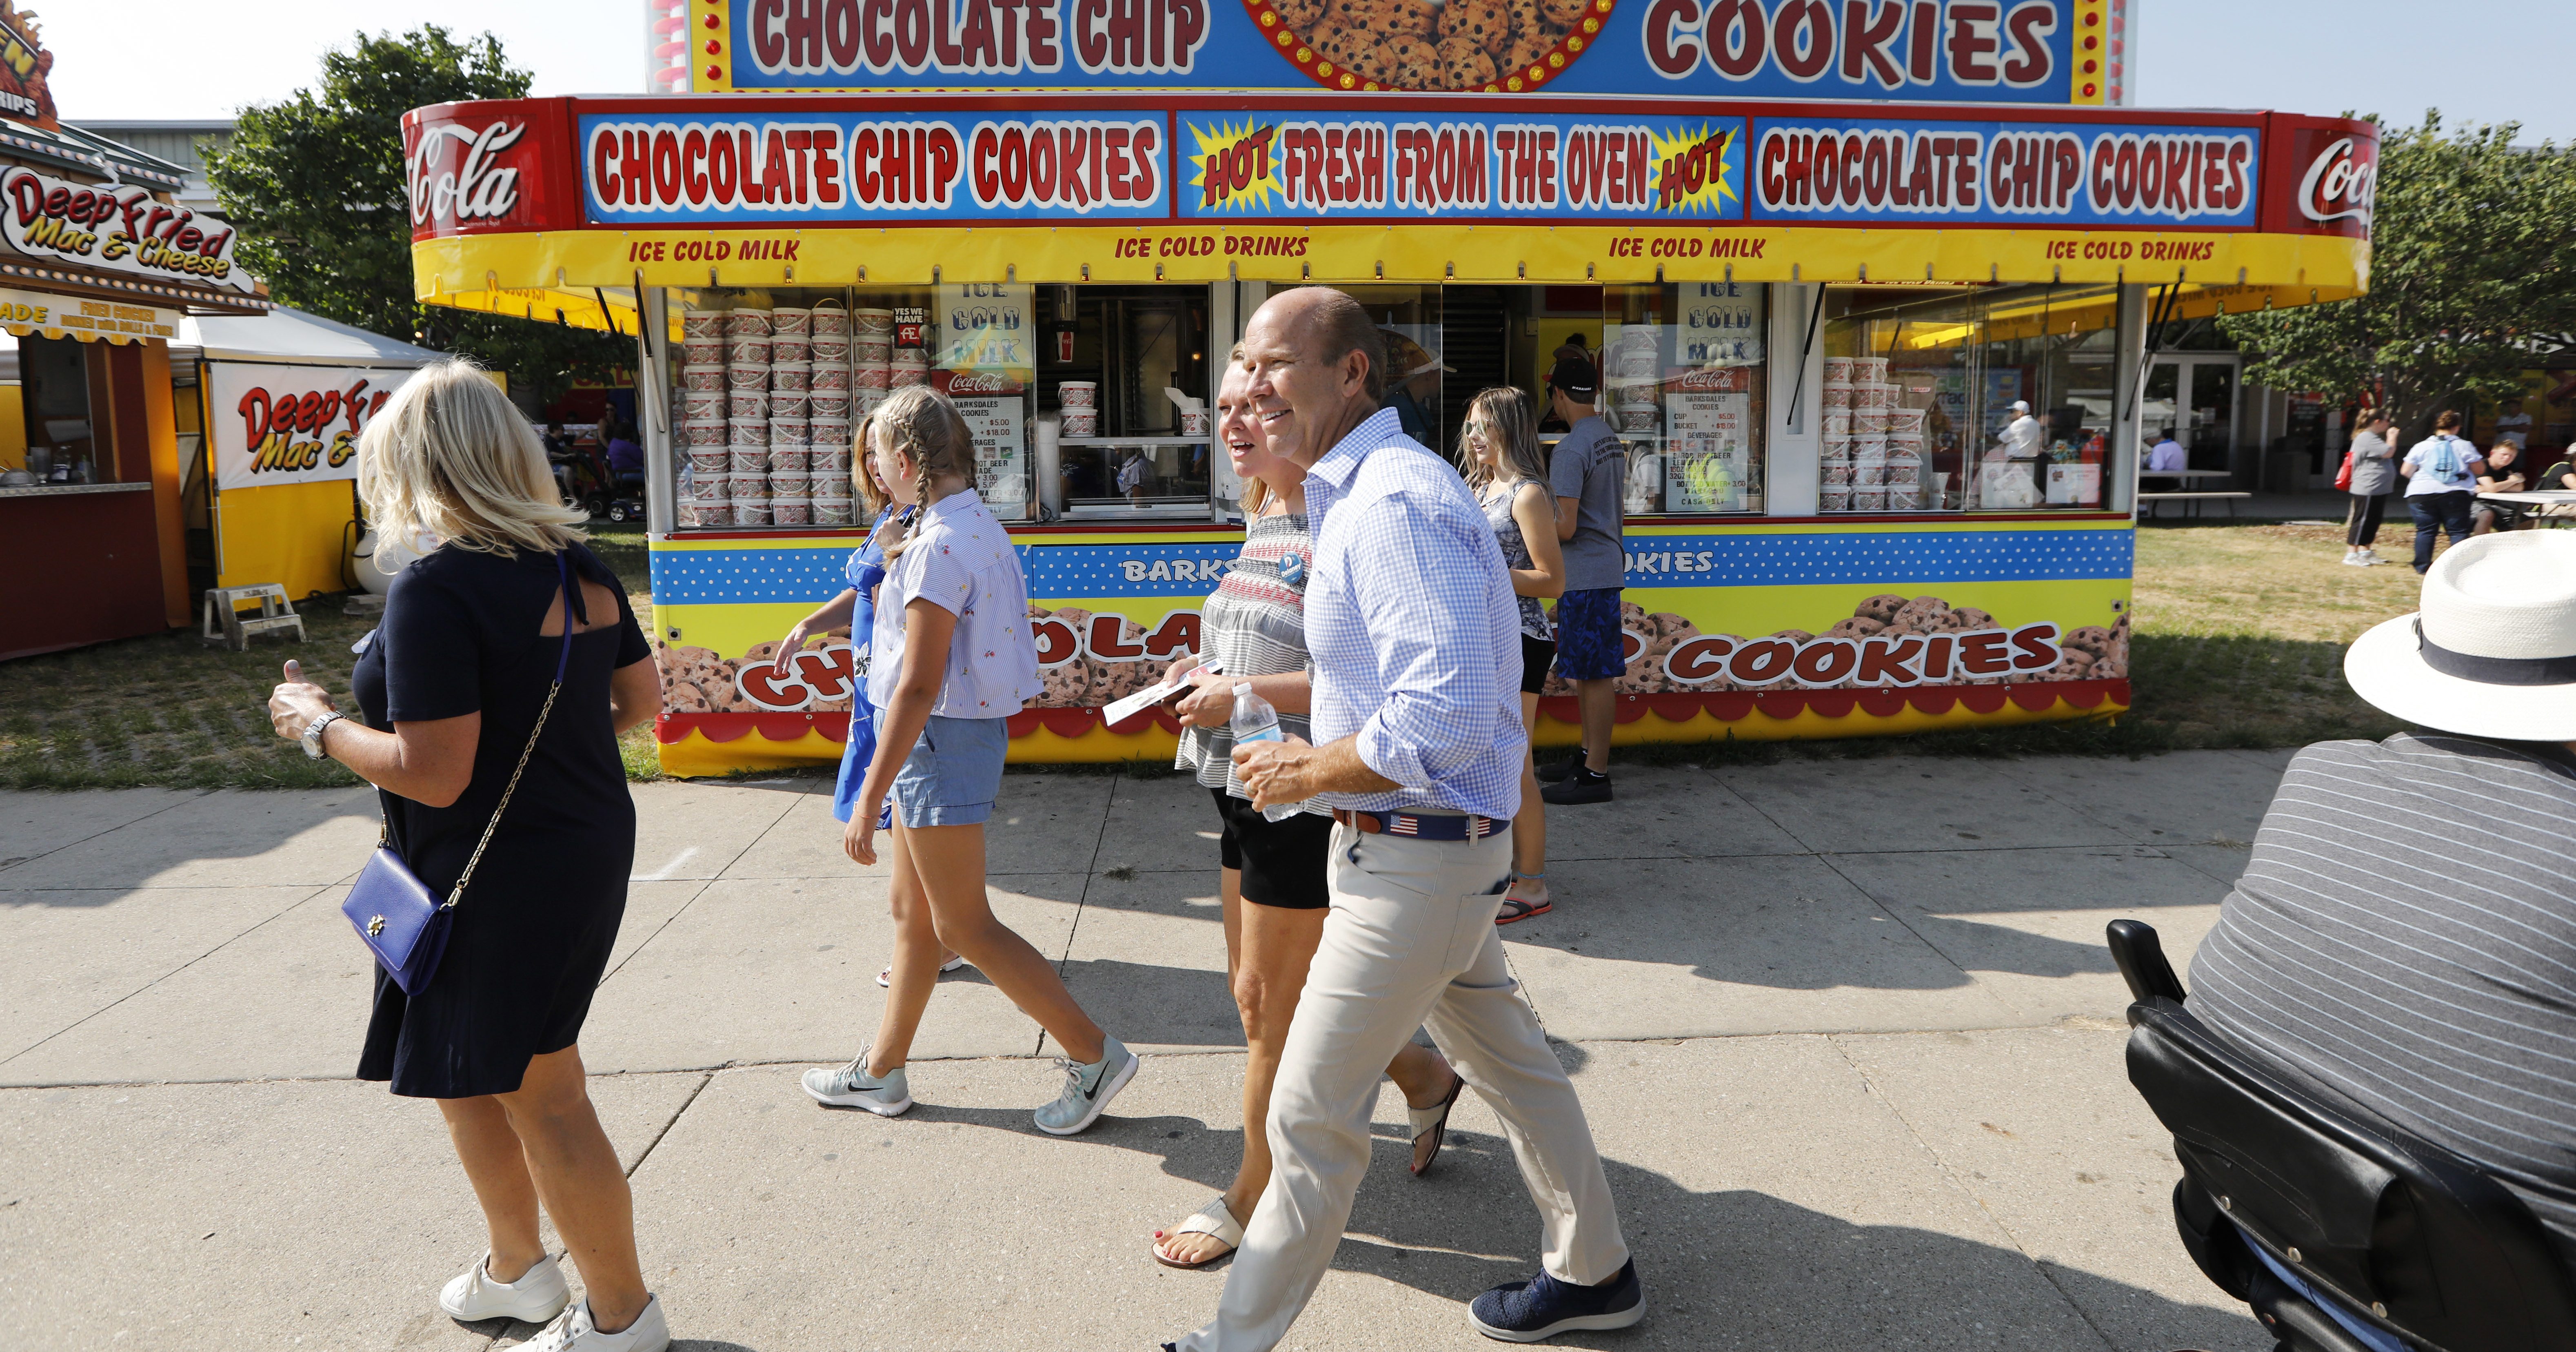 Rep. John Delaney, D-Md., walks past a concession stand during a visit to the Iowa State Fair, Friday, Aug. 10, 2018, in Des Moines, Iowa.